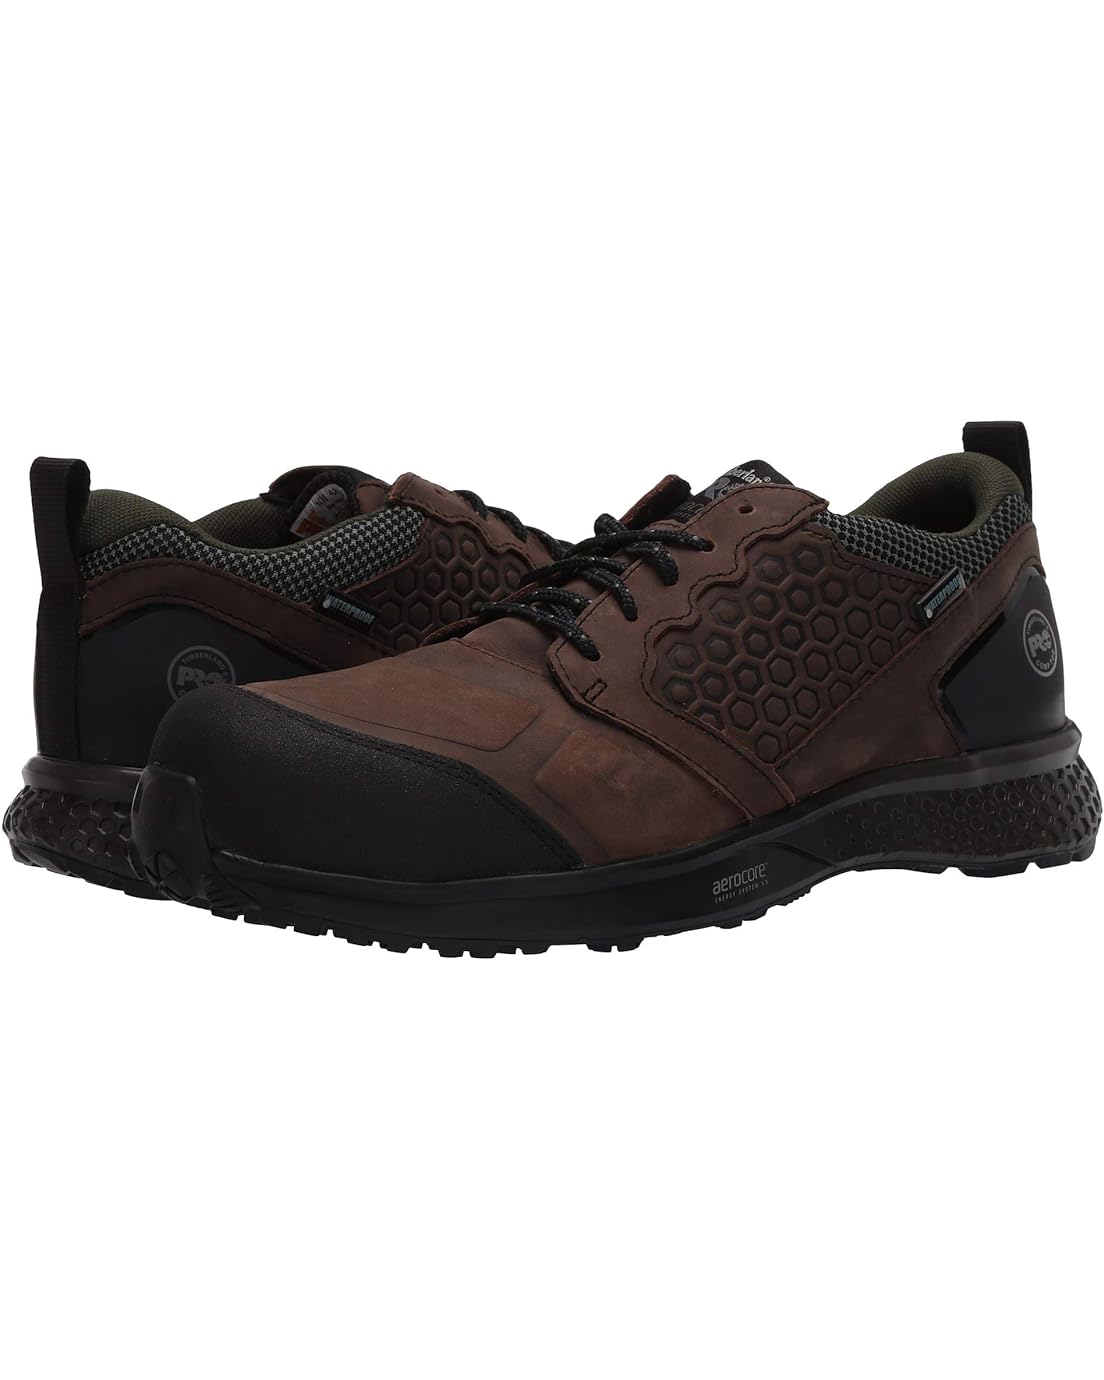 Timberland PRO Reaxion Composite Safety Toe Waterproof